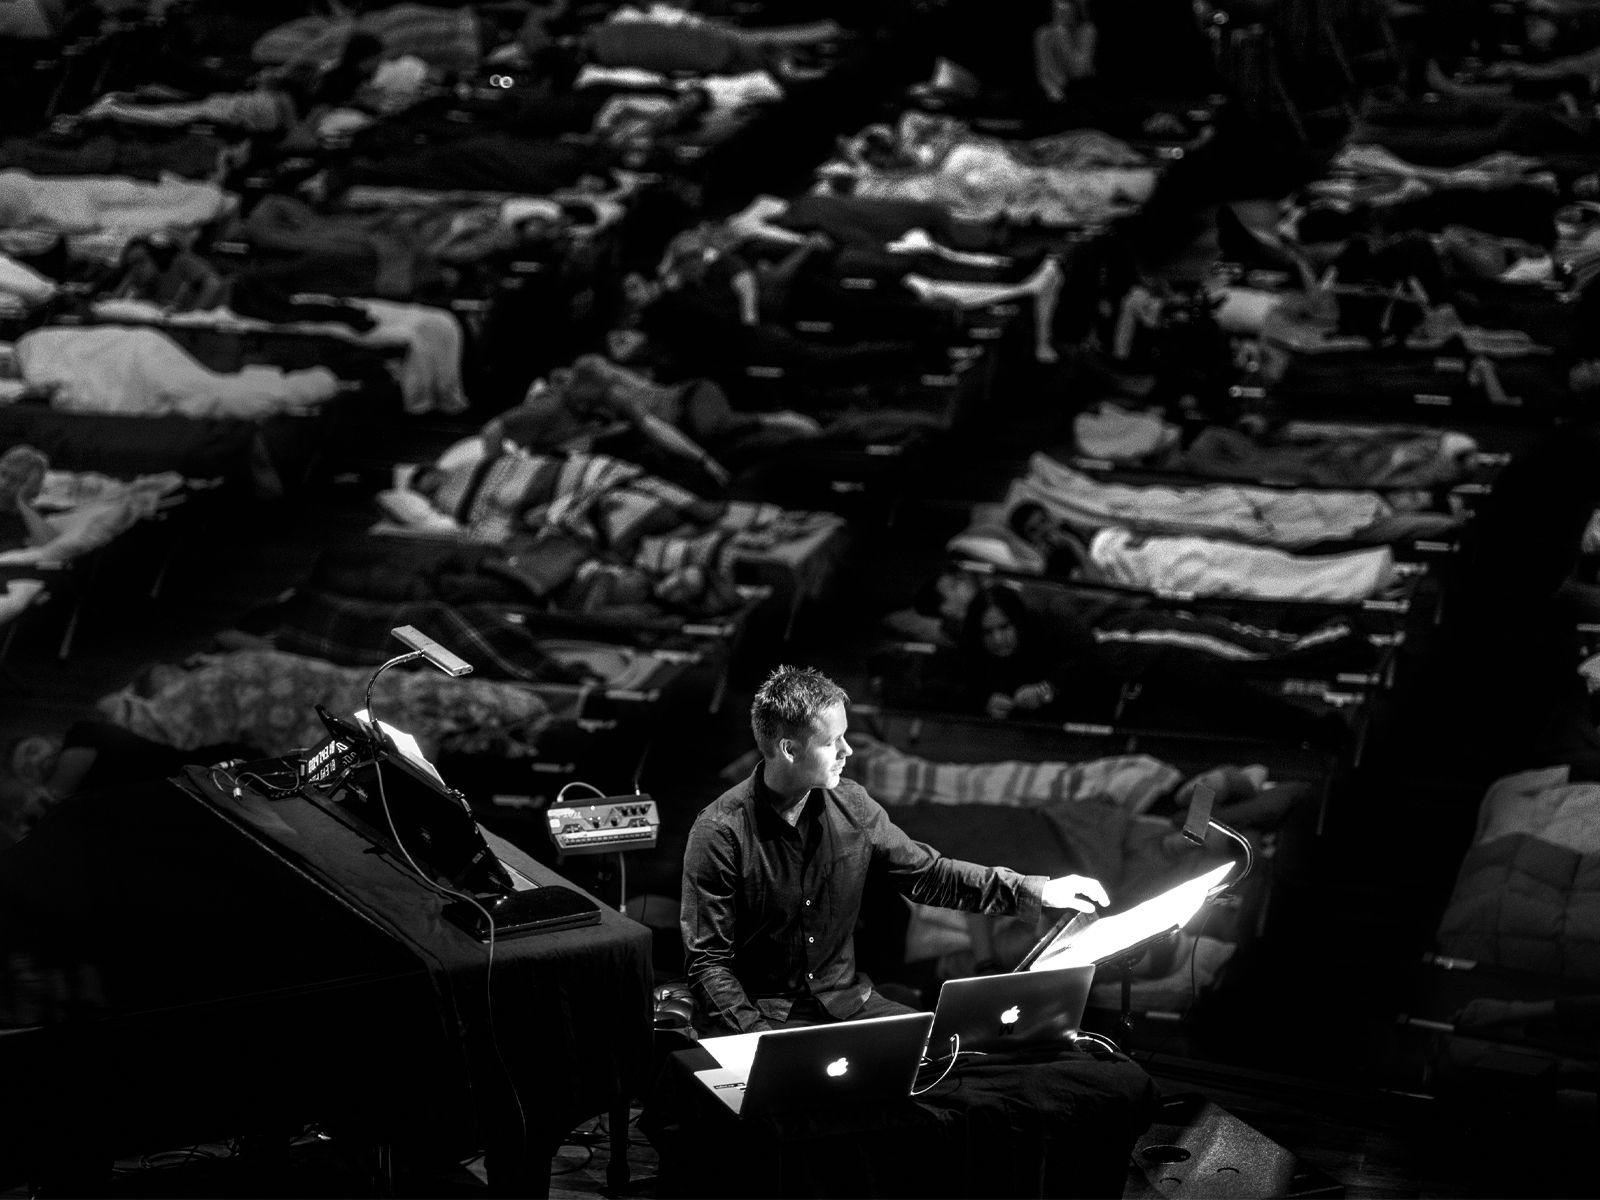 Max Richter performing, with several people sleeping in beds behind him.